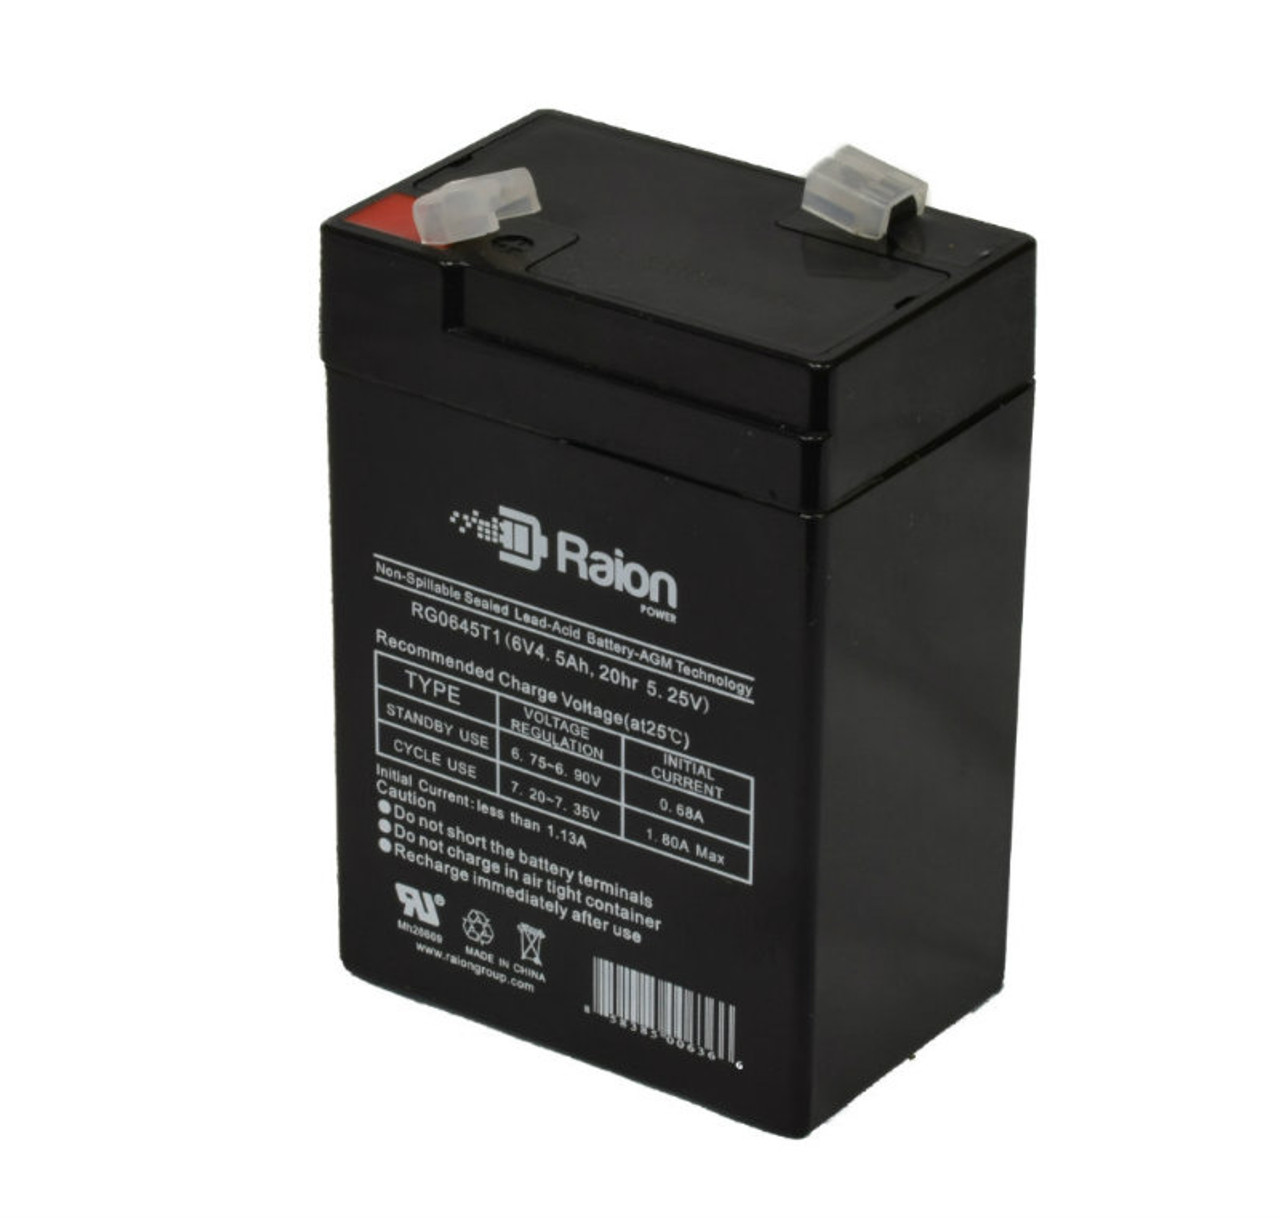 Raion Power RG0645T1 6V 4.5Ah Replacement Battery Cartridge for EaglePicher CF-6V4.5